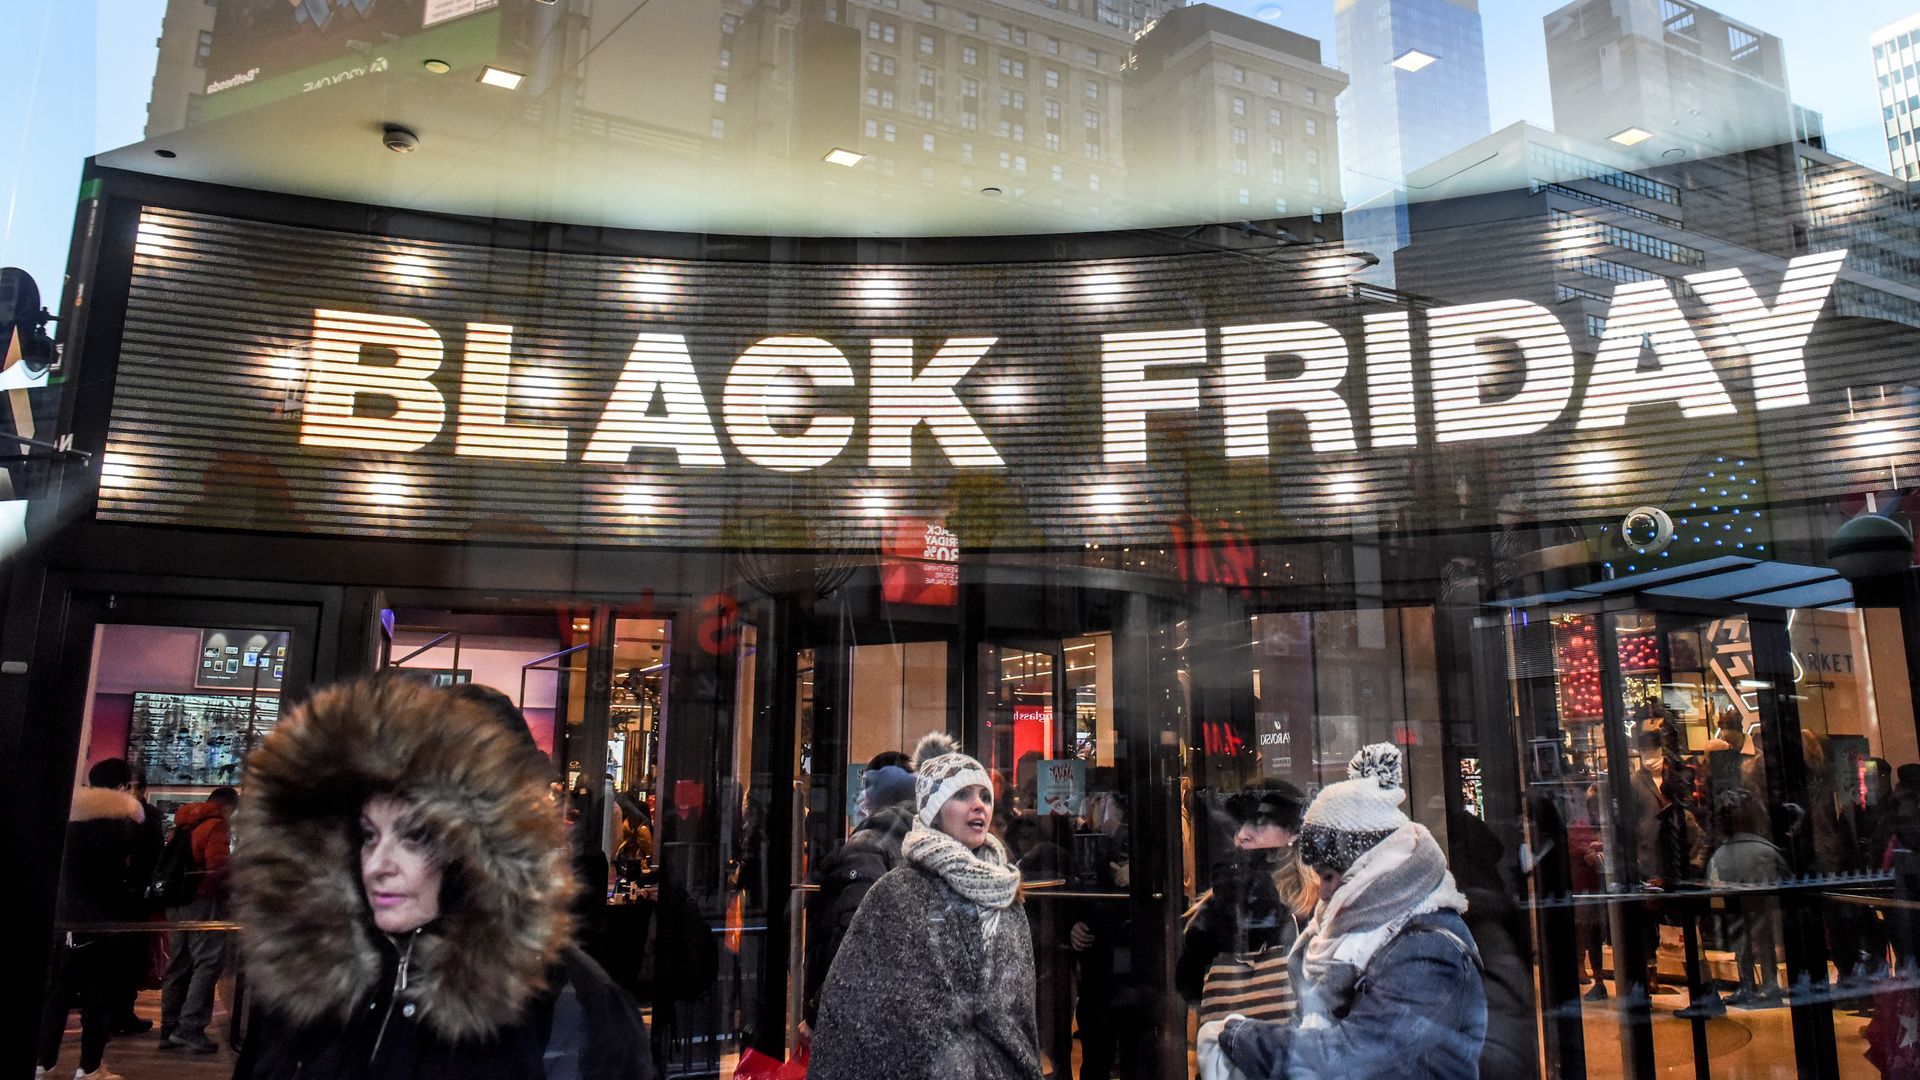 Black Friday sign in flashing lights in New York City